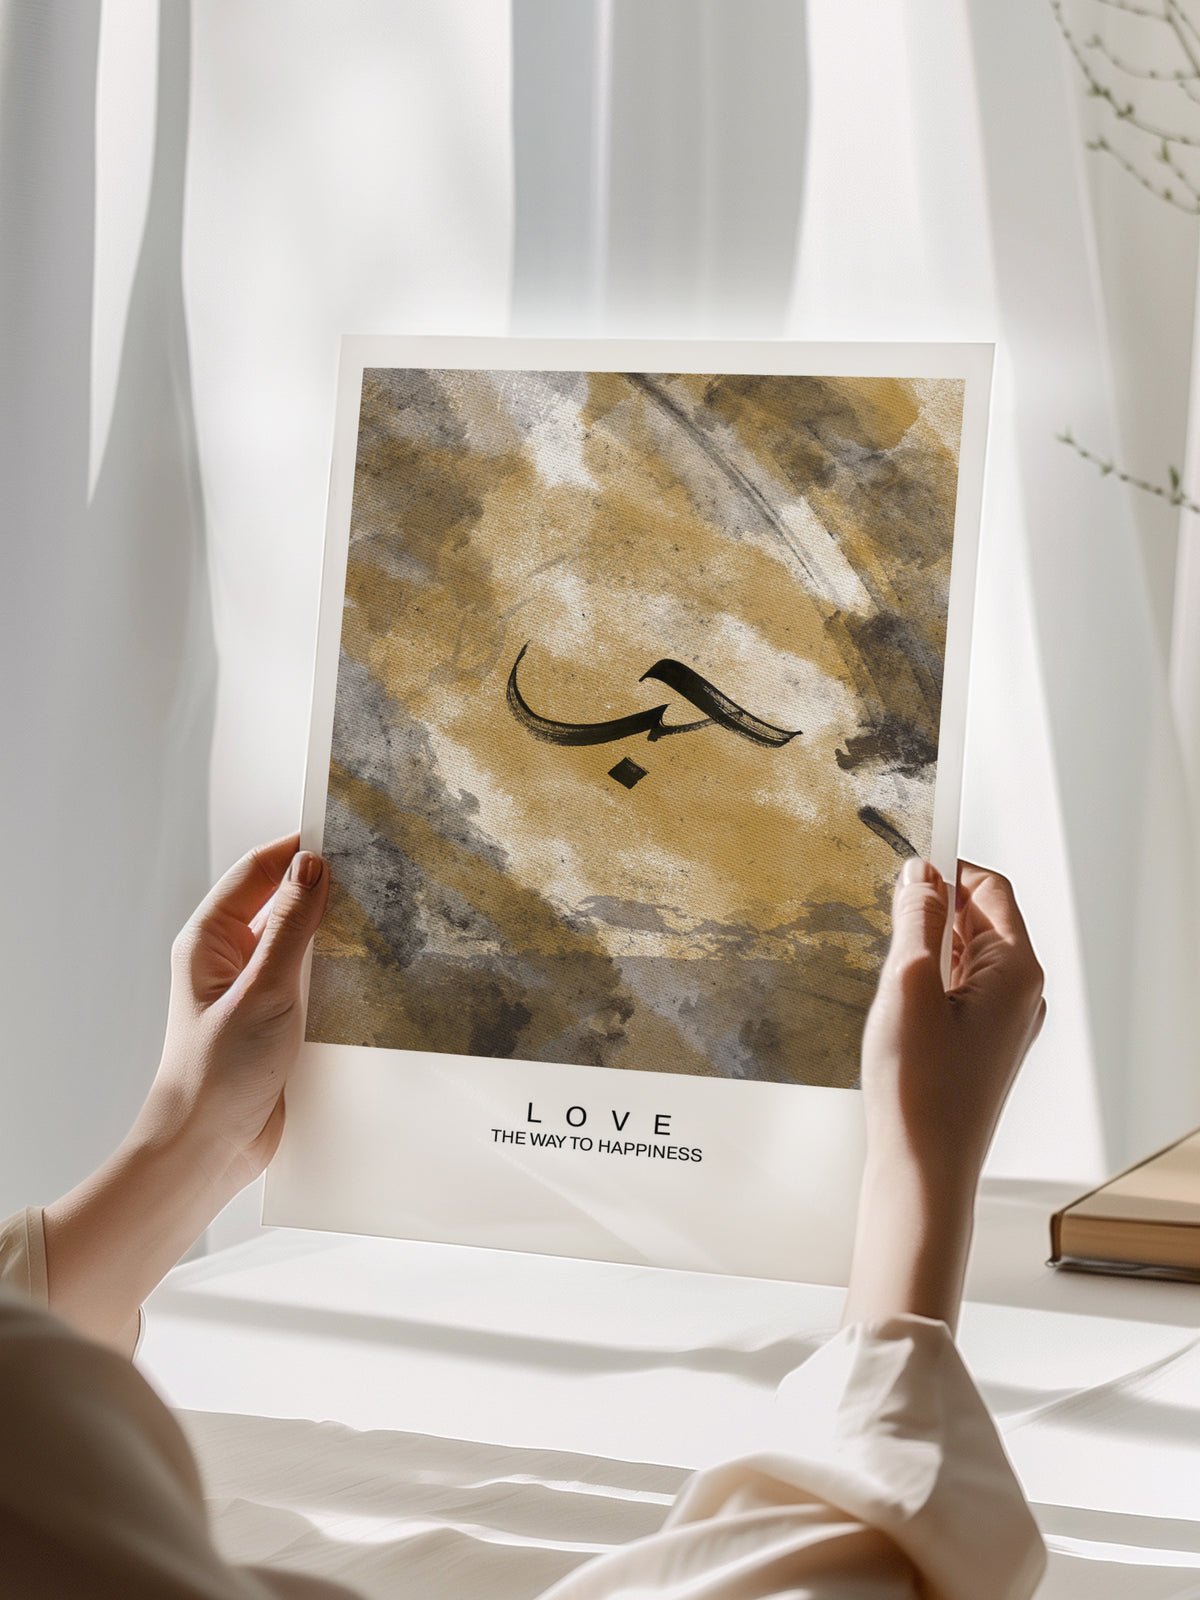 Abstract Love Poster